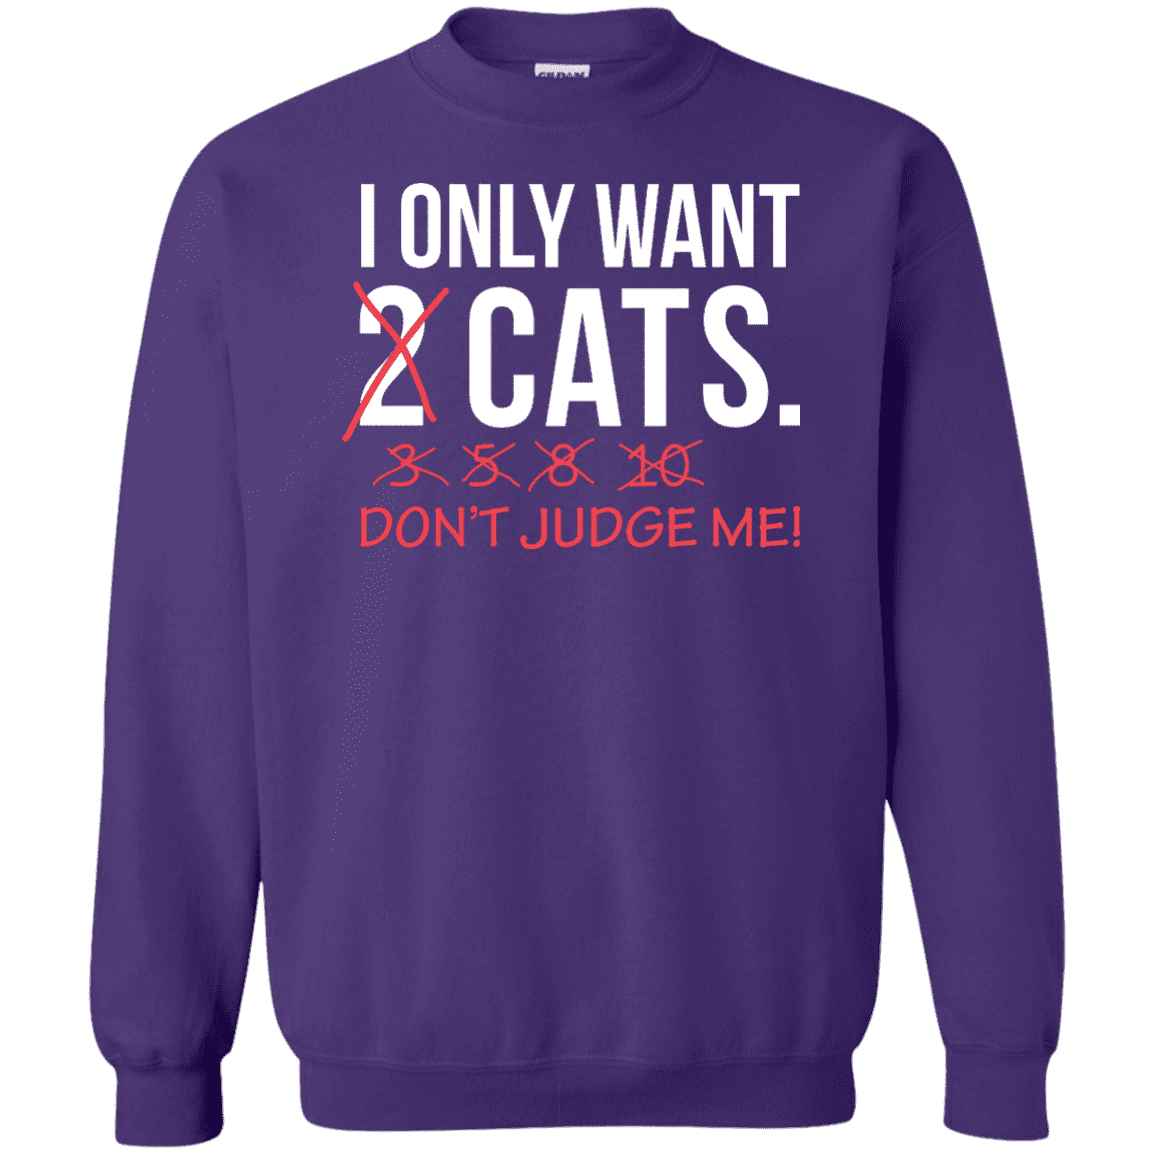 Only Want Cats - Sweatshirt.